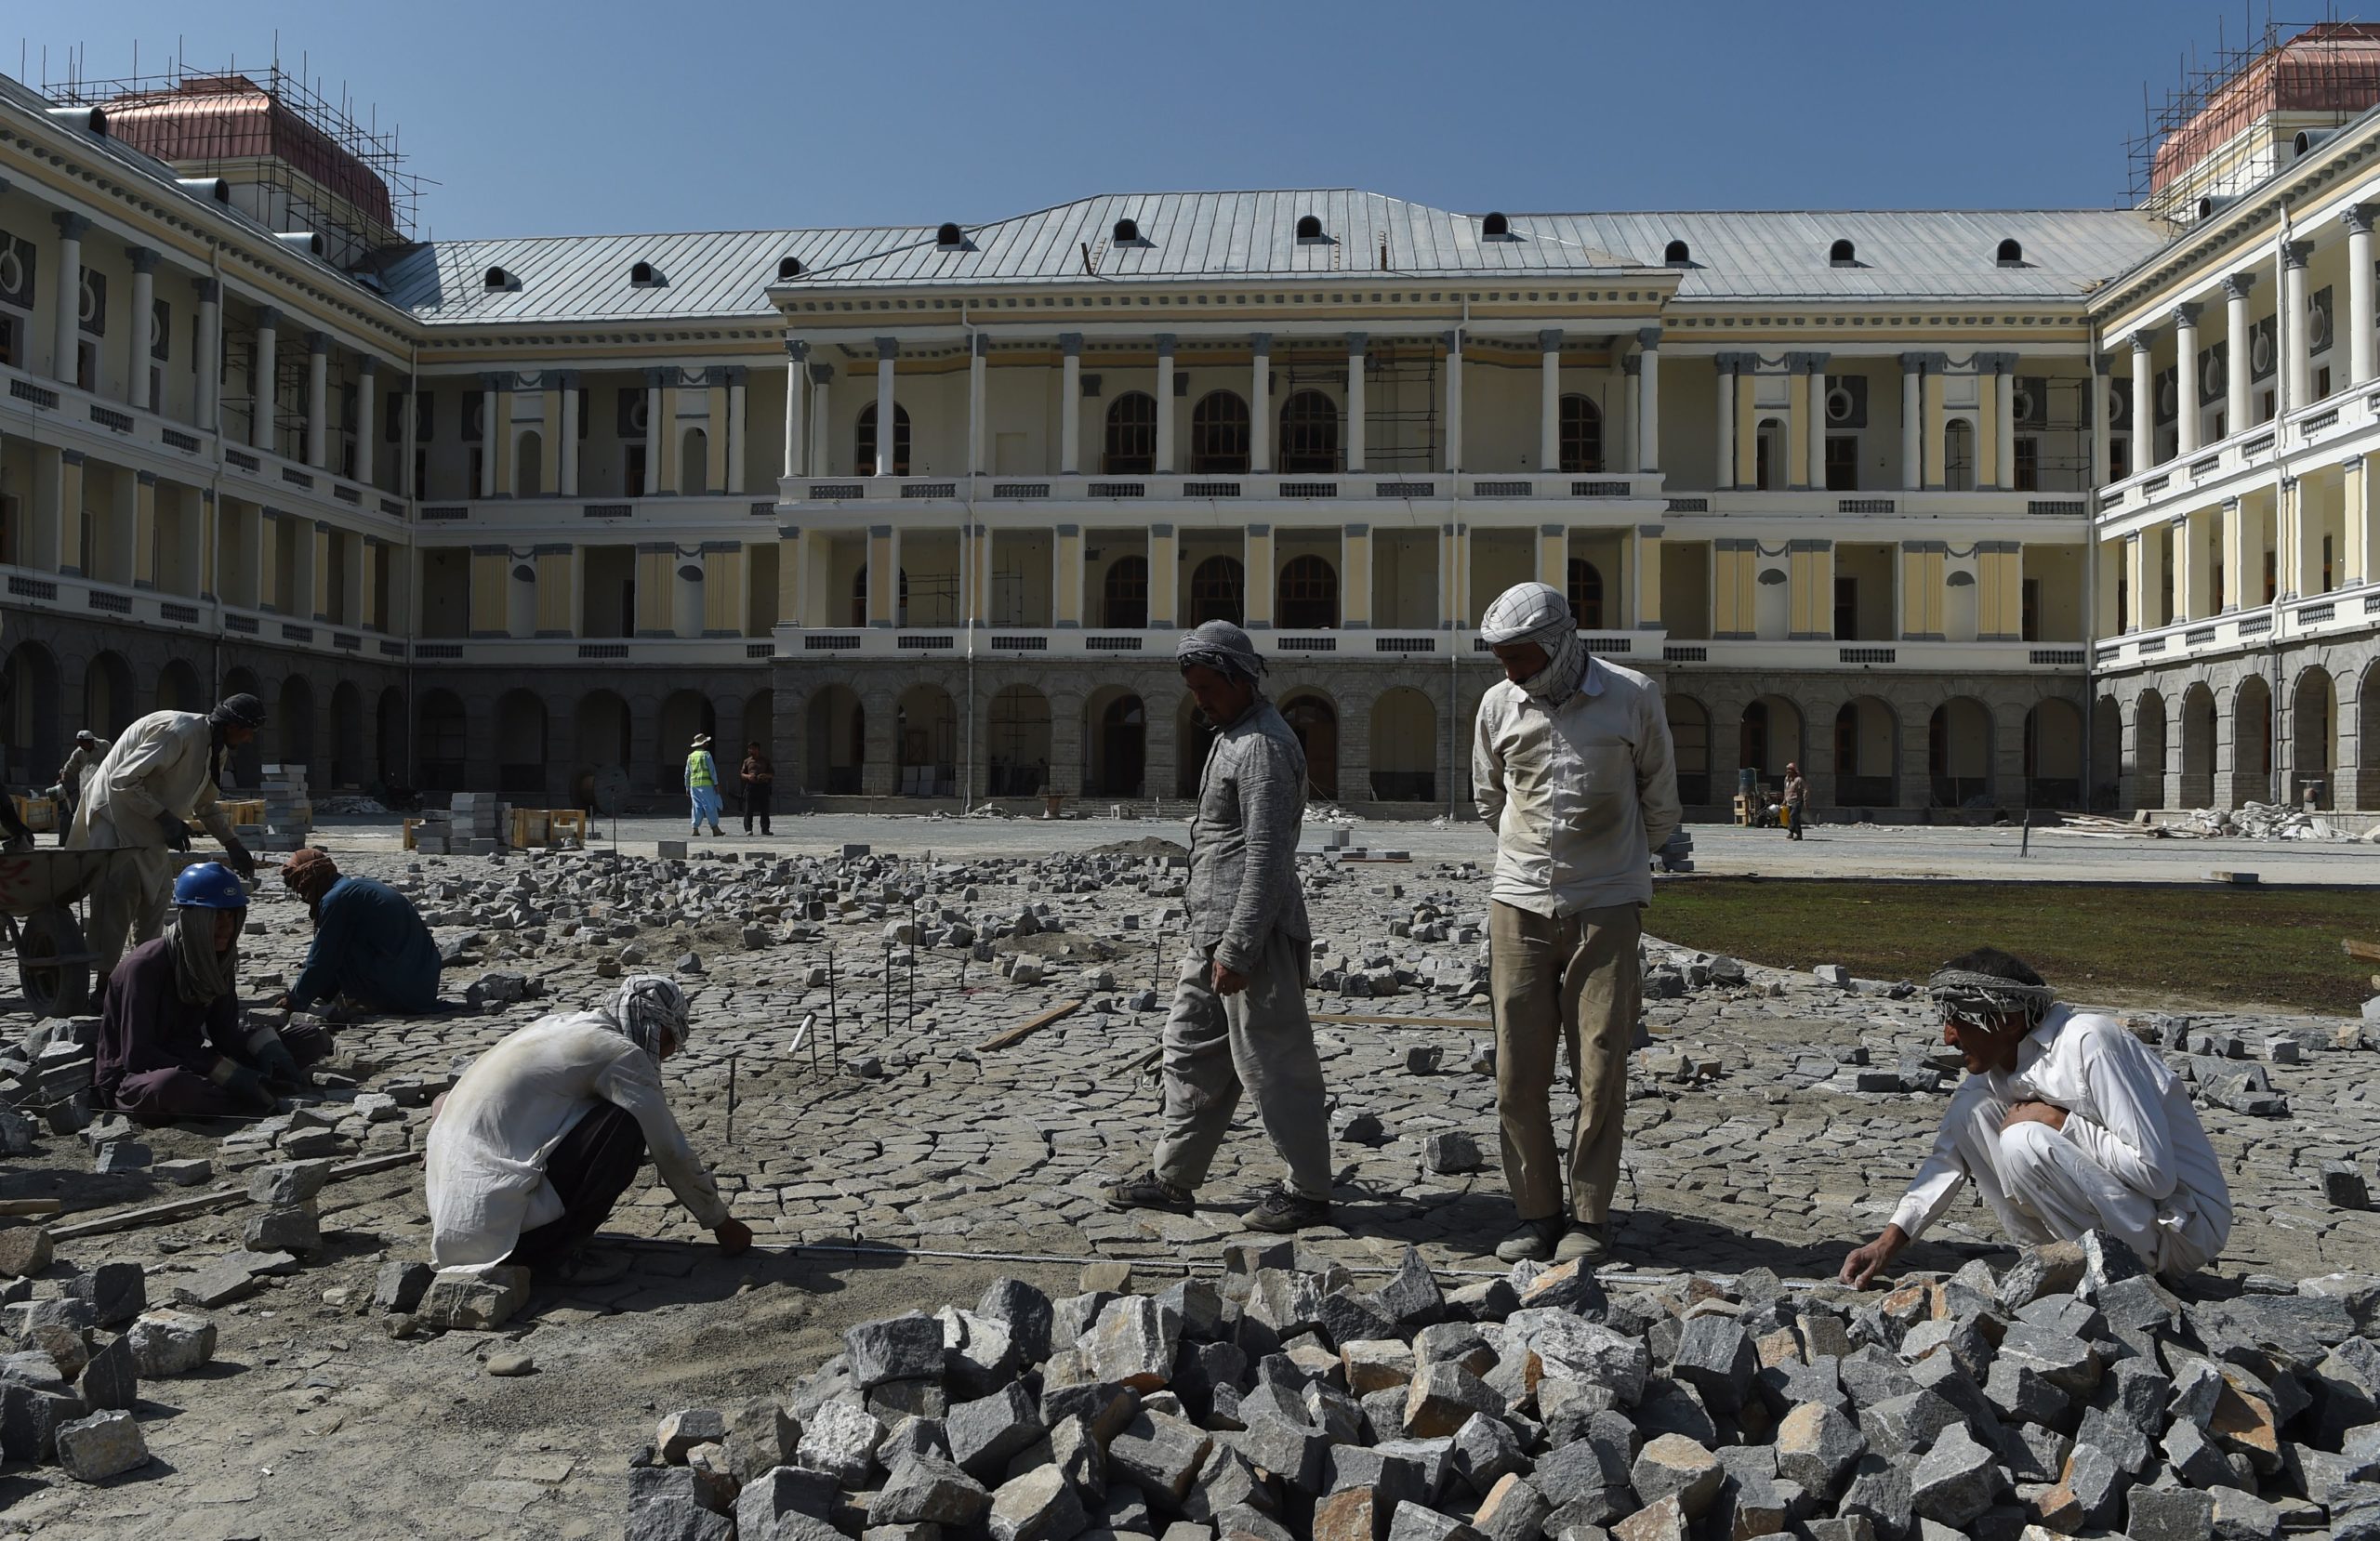 In this photo taken on August 8, 2019 Afghan labourers work on the exterior renovation of Darulaman Palace in Kabul. - Work to completely renovate the once-ruined Darulaman Palace must be completed by August 19, the date marking 100 years of Afghan independence from Britain, when President Ashraf Ghani will inaugurate the newly finished structure that has came to reflect the country's turmoils during decades of war.